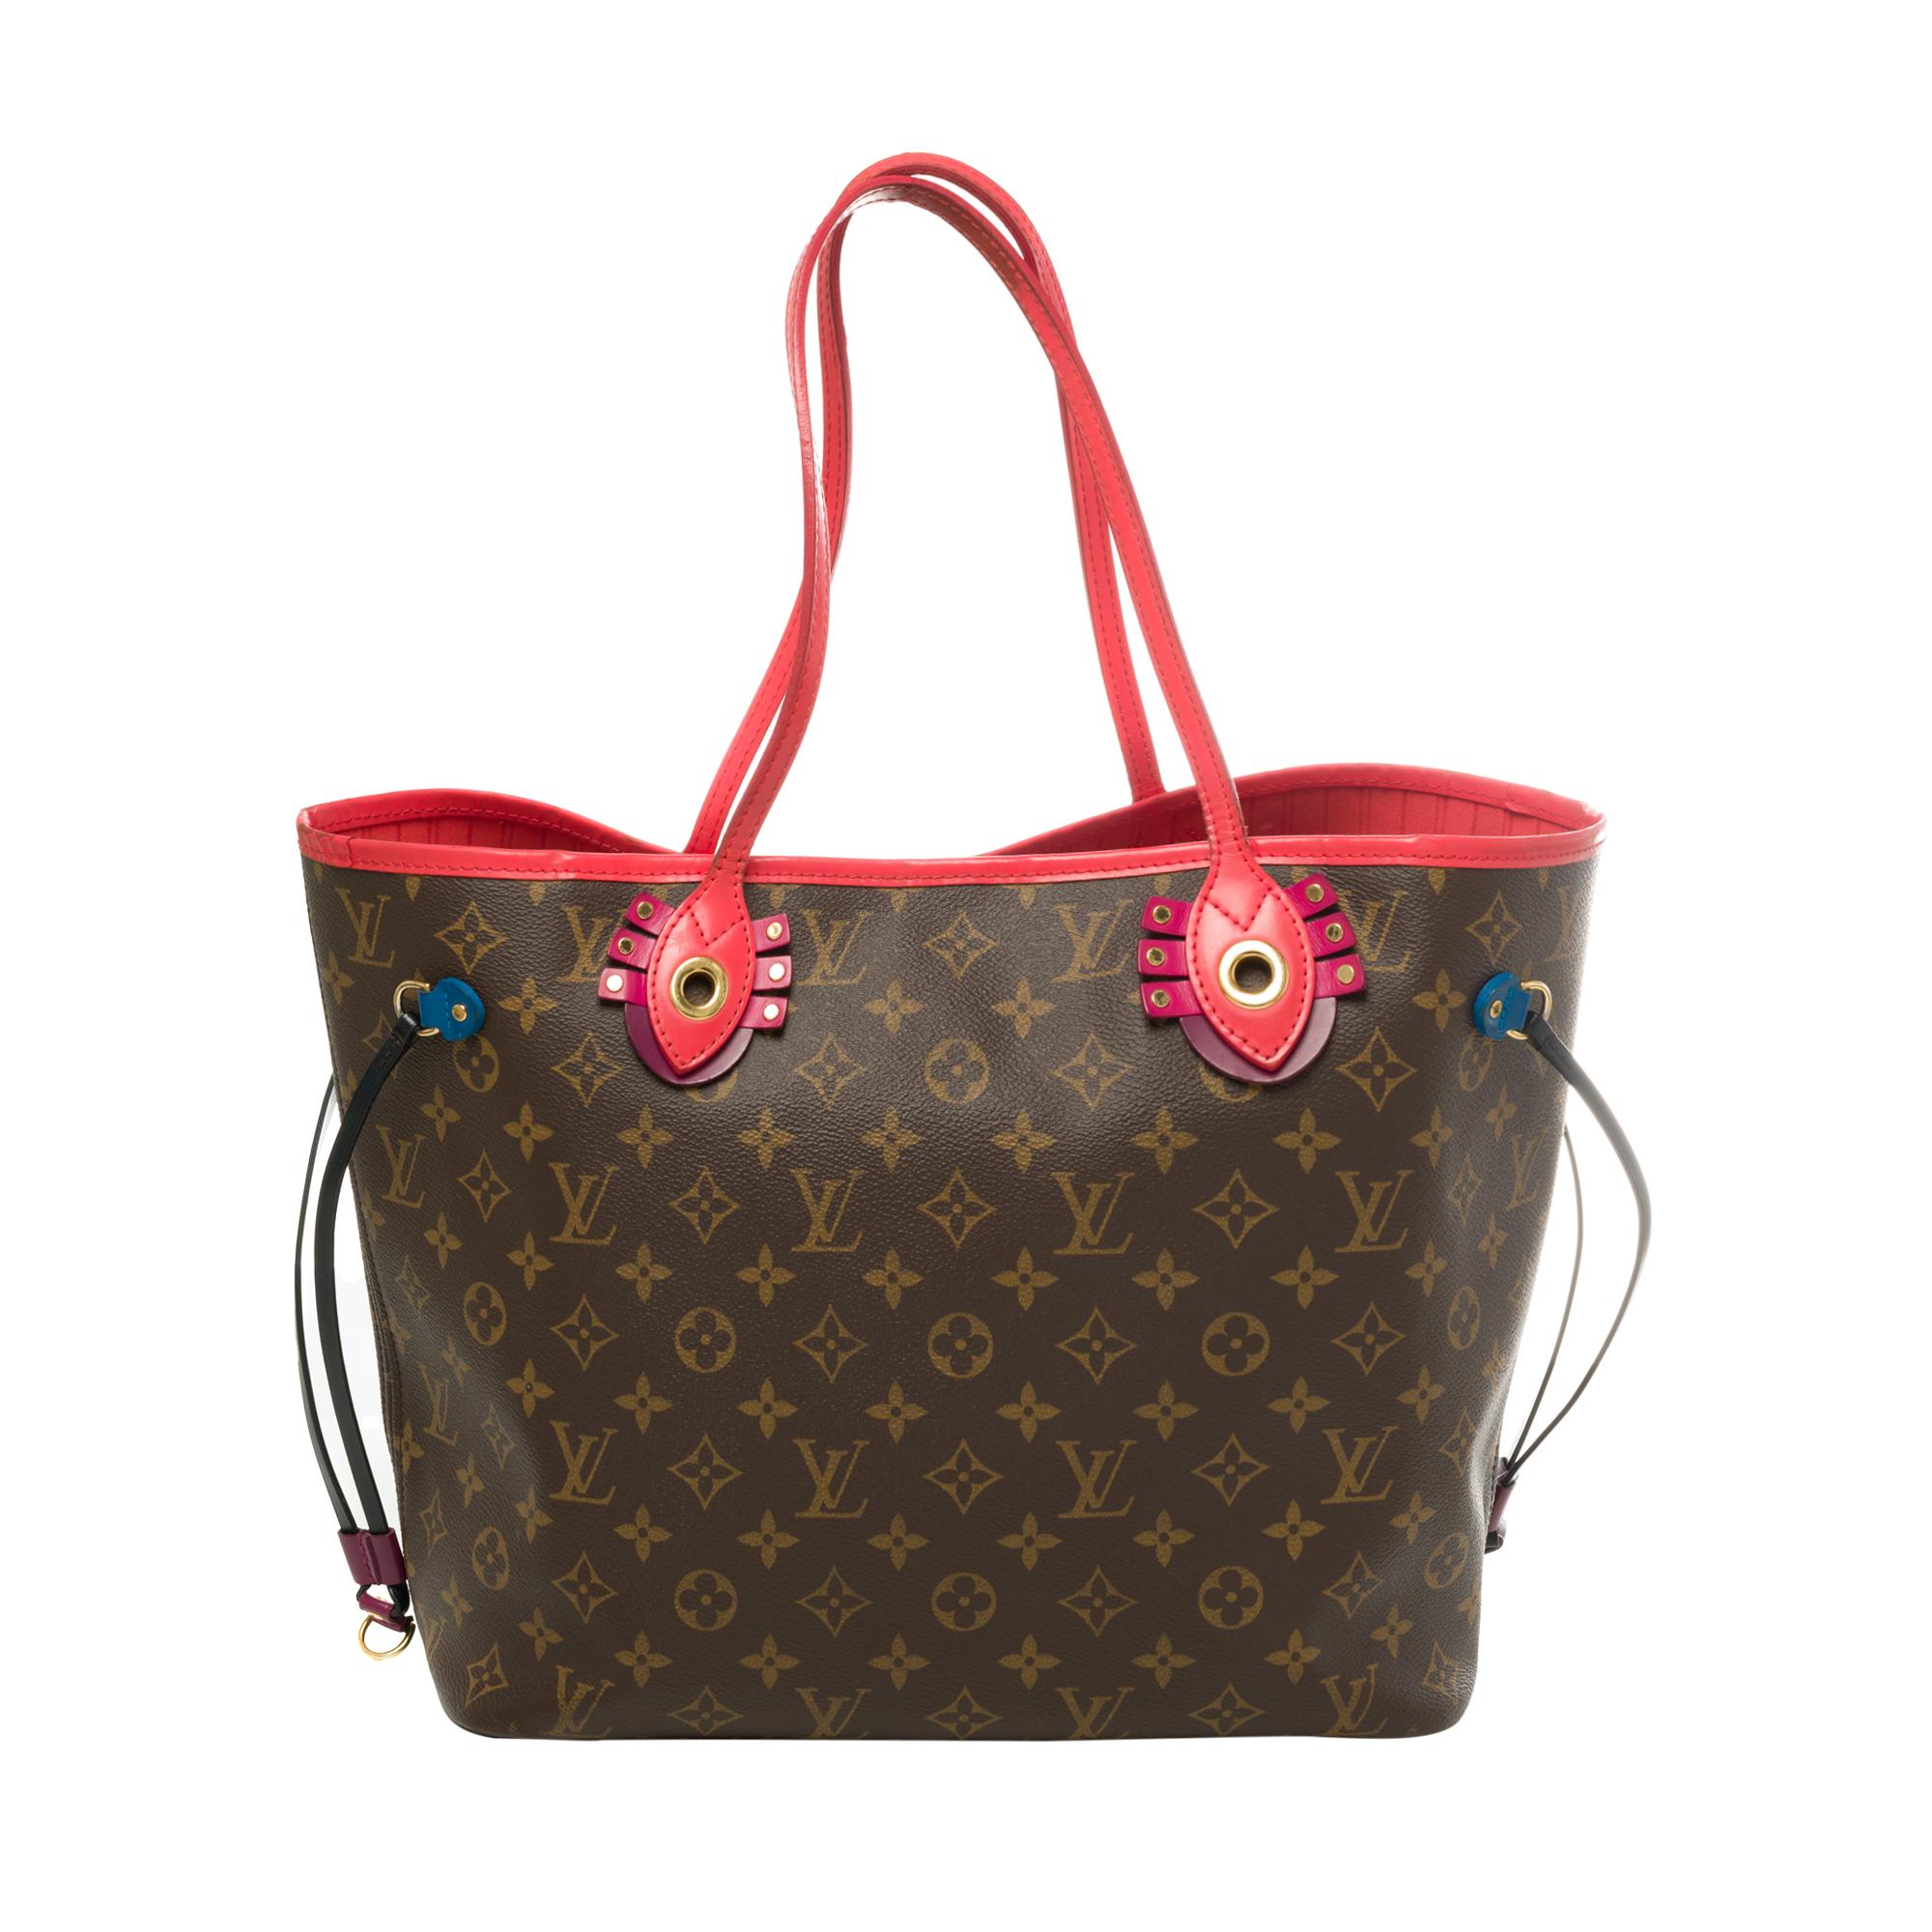 Totem Limited Edition

Beautiful Shopping bag Louis Vuitton Neverfull MM in monogram canvas limited edition 